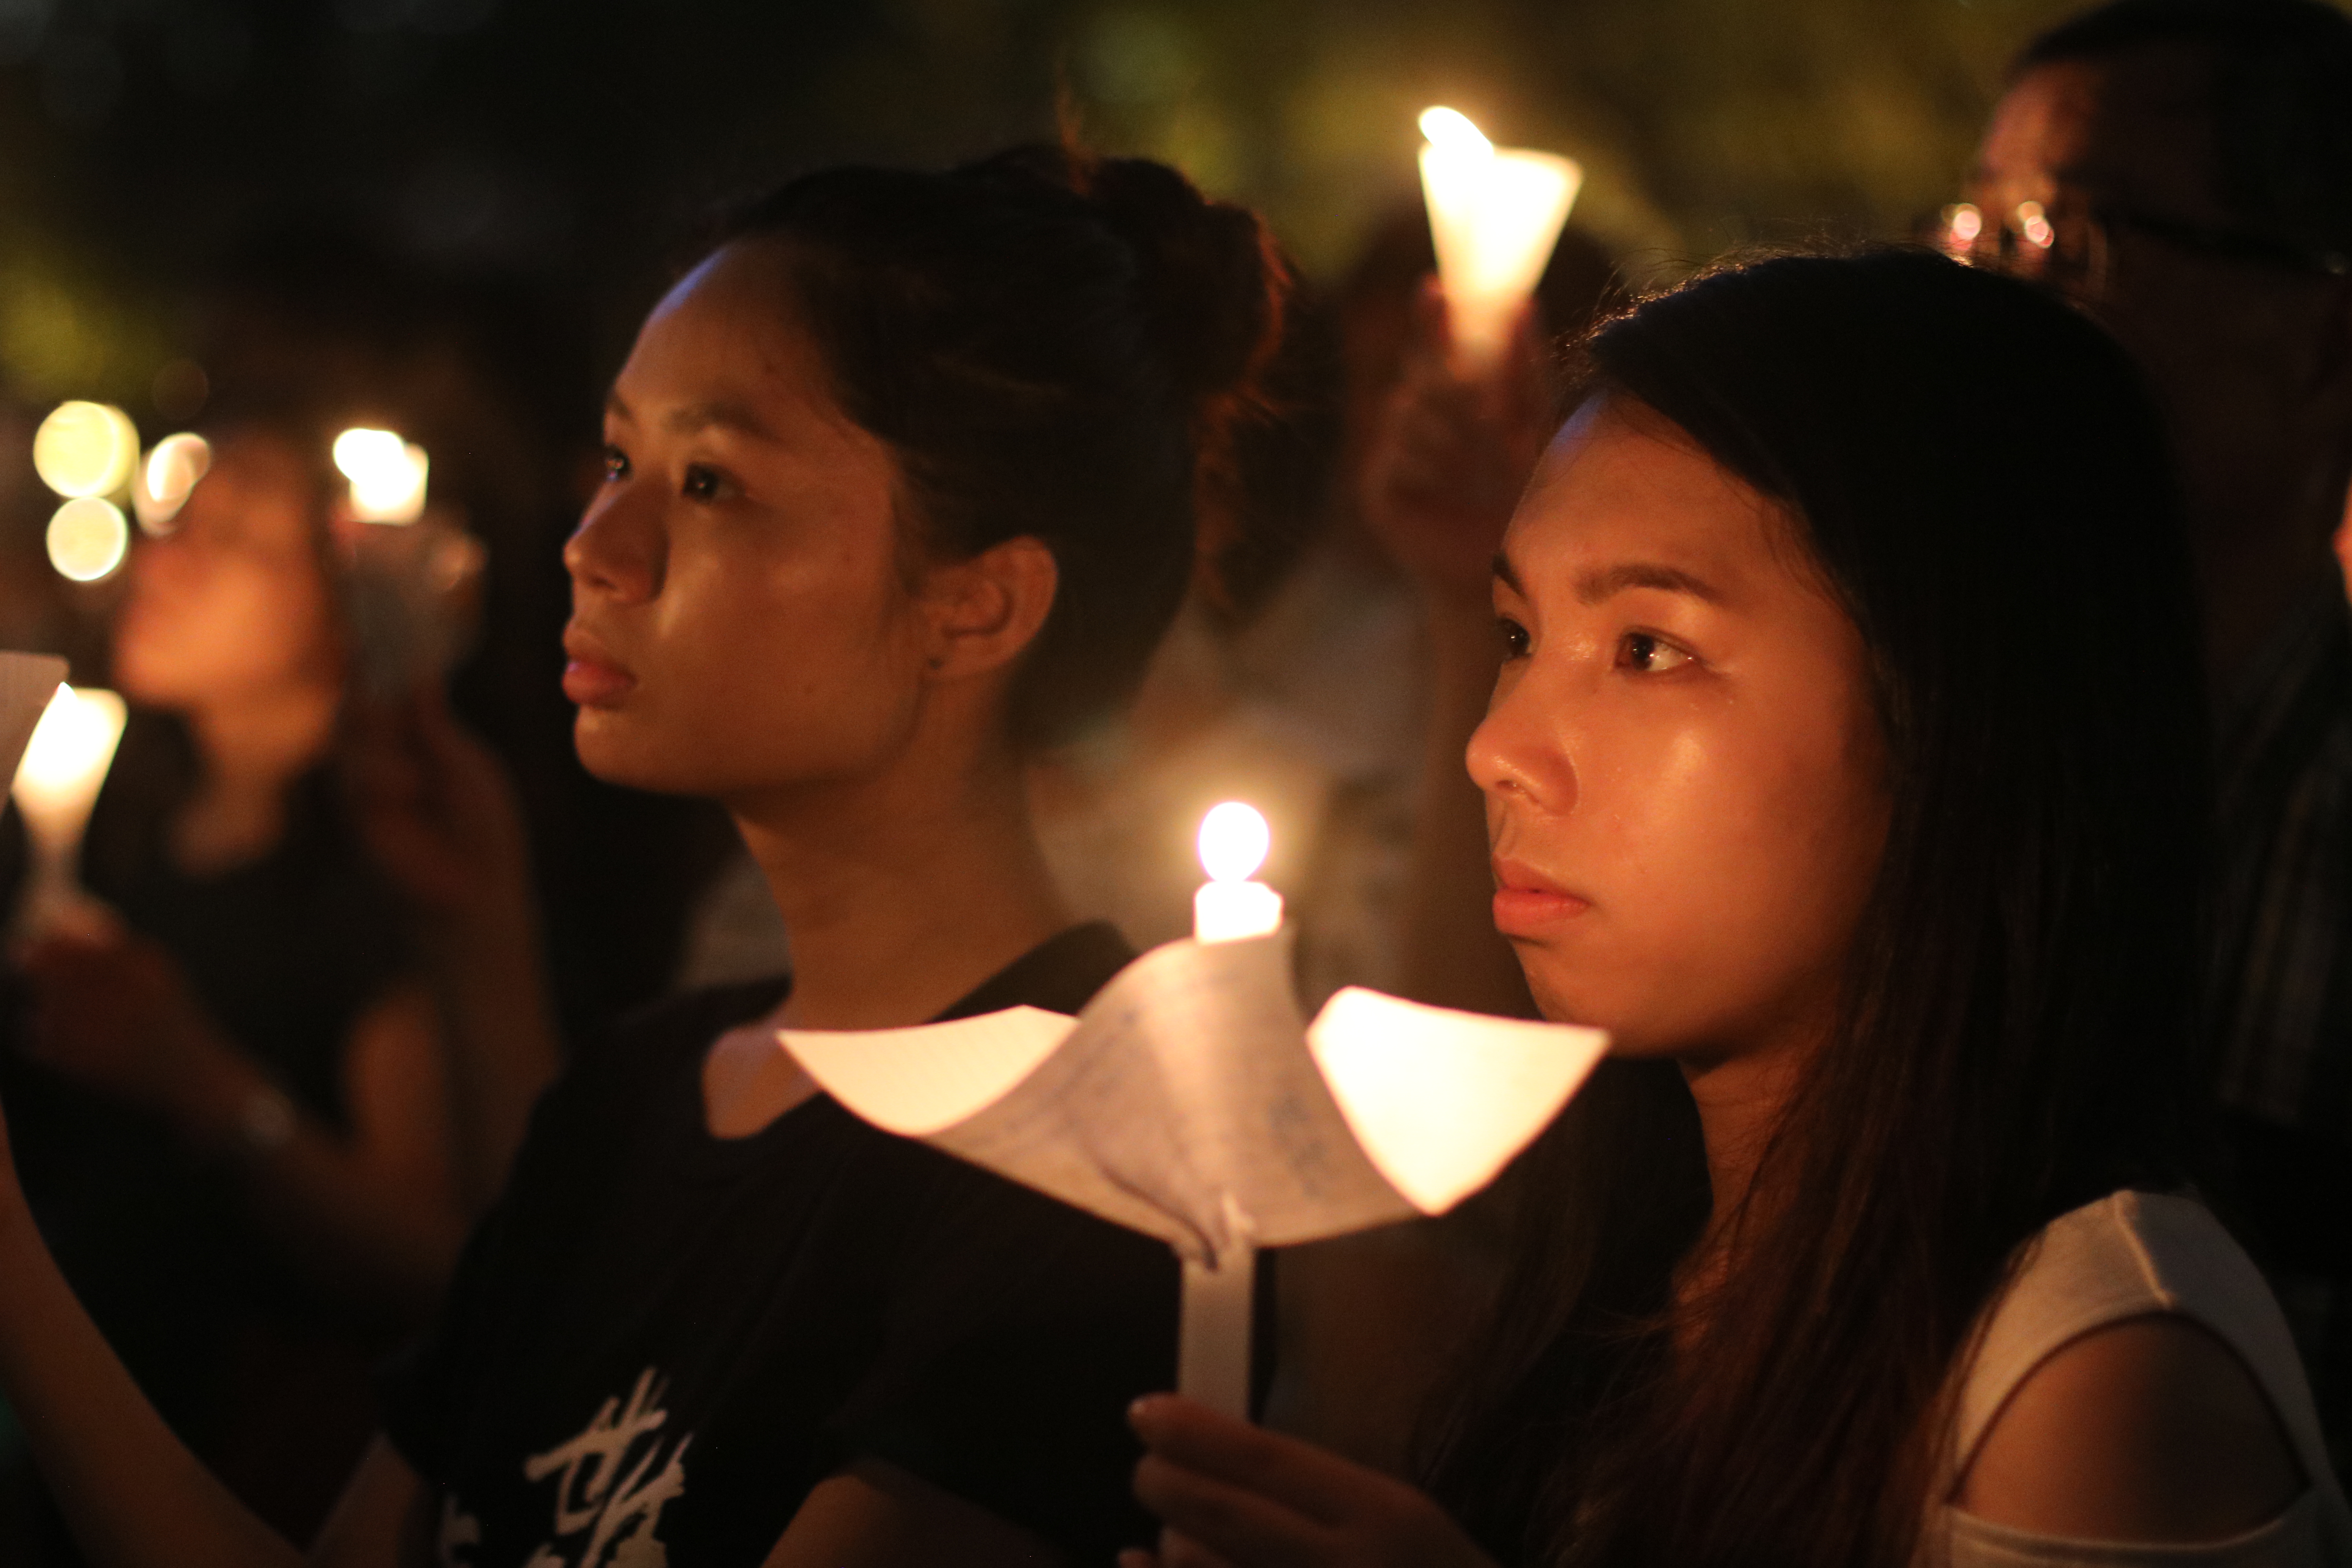 The candle light vigil is an annual event in Hong Kong to commemorate the deaths of those who fought for democracy in Beijing in 1989.